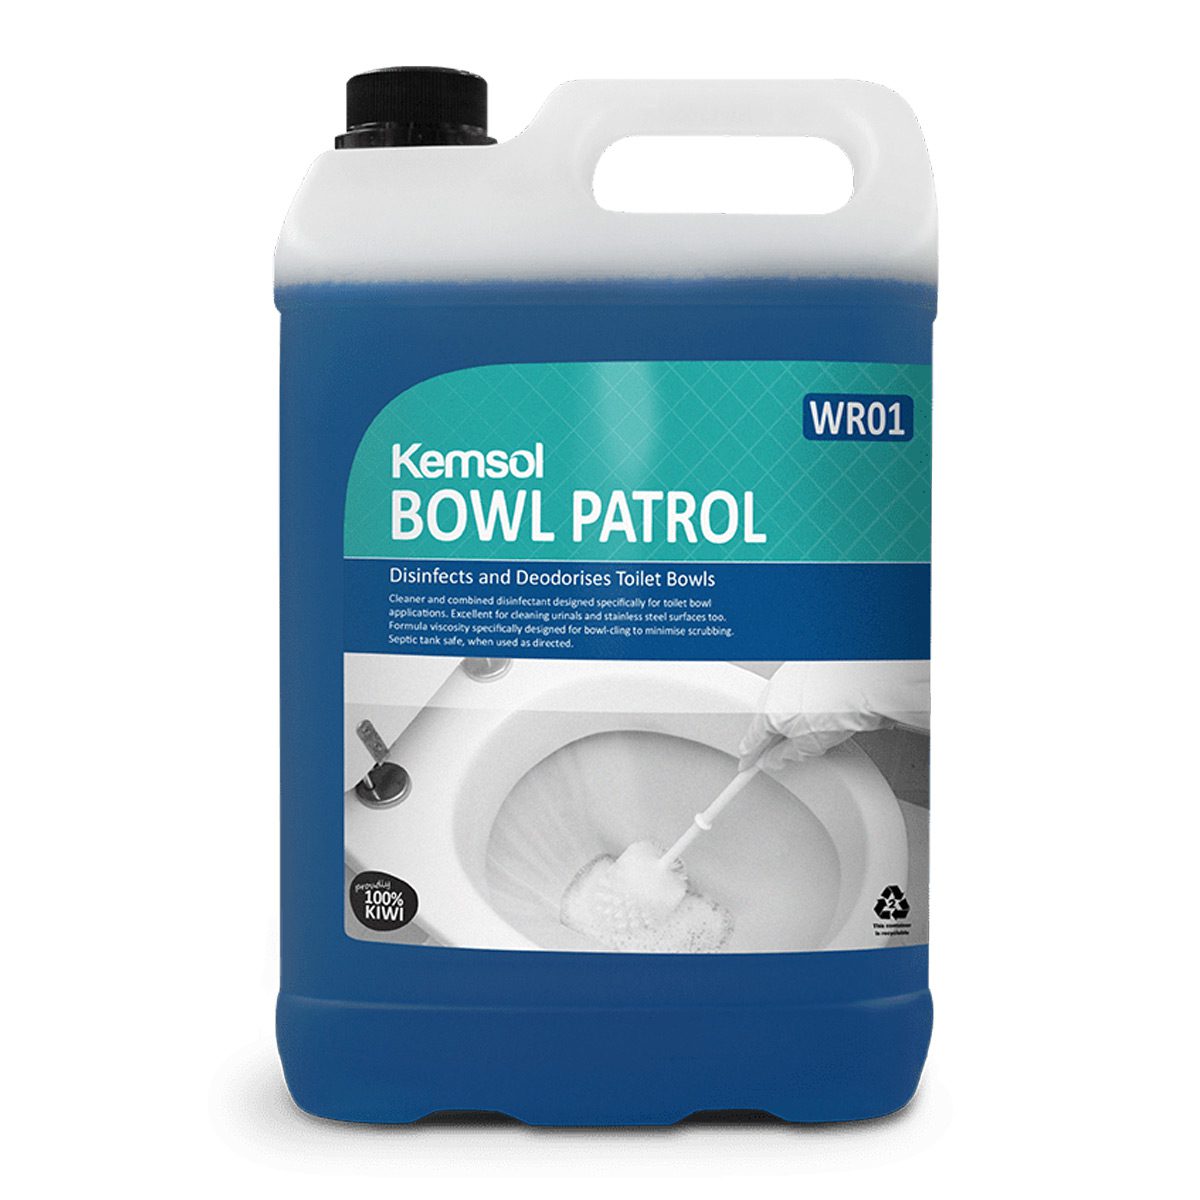 cleaning-products-washroom-kemsol-bowl-patrol-toilet-cleaner-cleaner-combined-disinfectant-for-toilet-bowls-urinals-stainless-steel-surfaces-viscosity-bowl-cling-vjs-distributors-KBOWLSKU